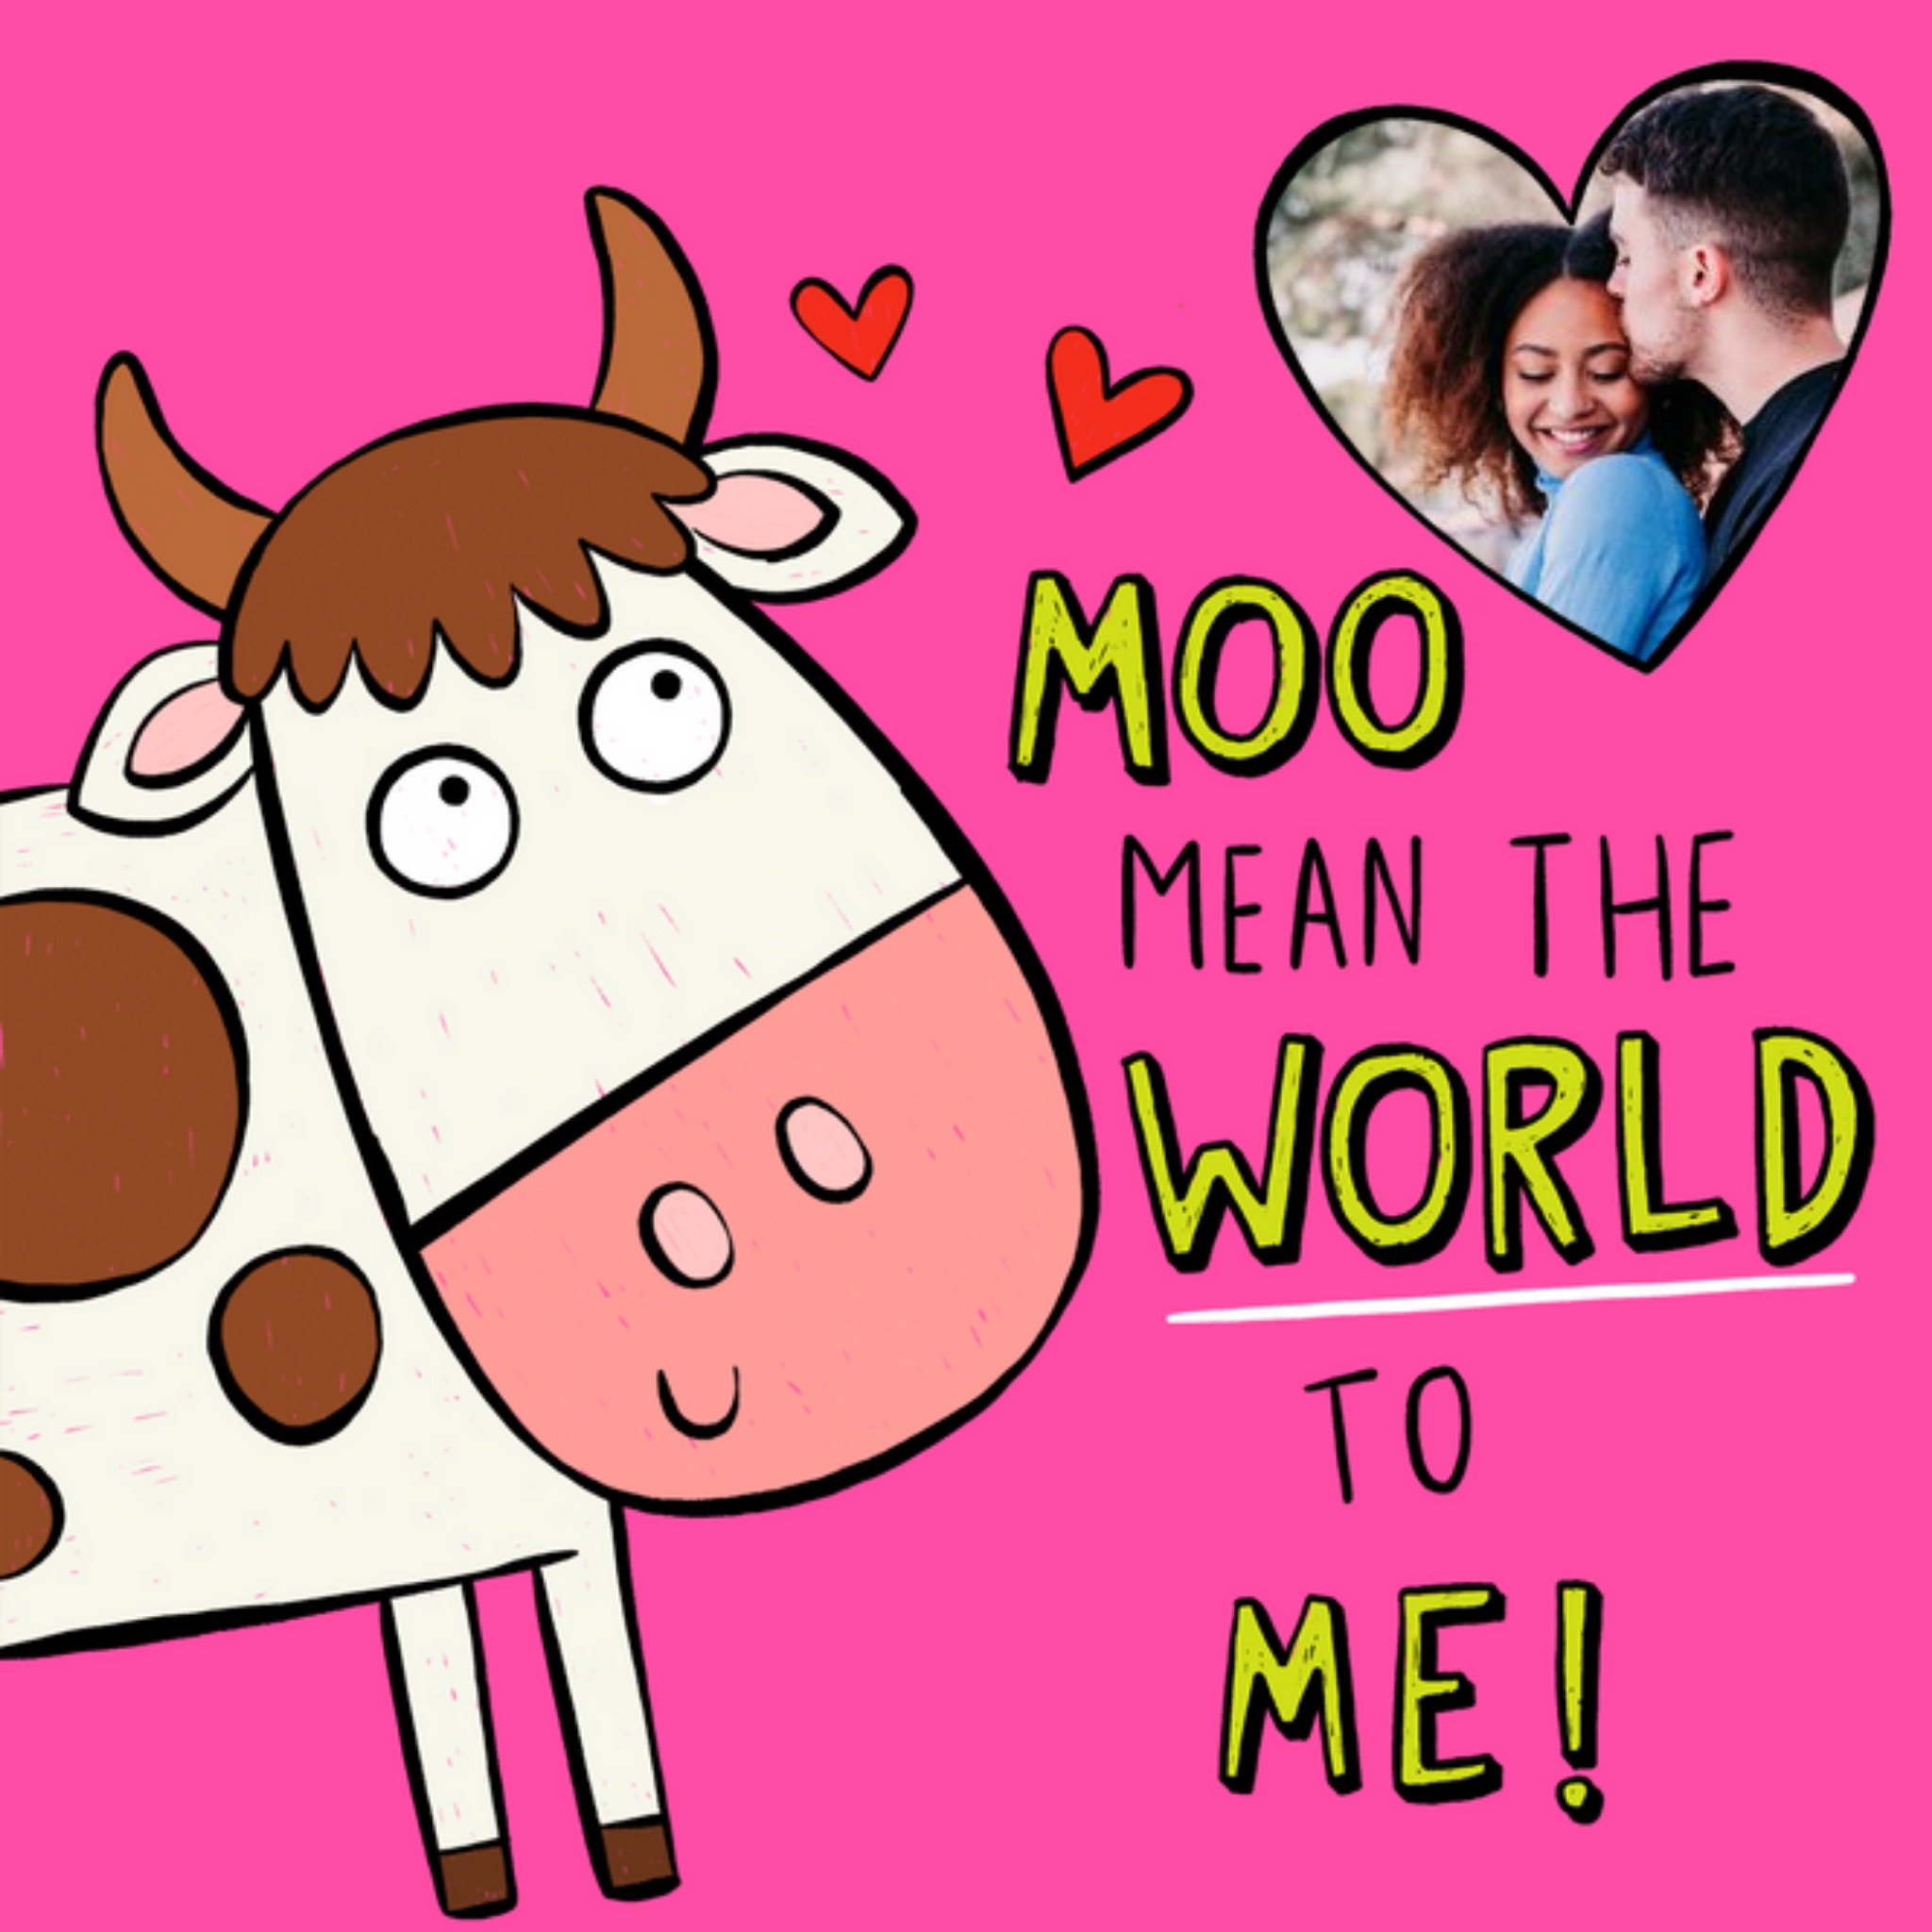 Moonpig Illustration Cow Moo Mean The World Photo Upload Card, Square